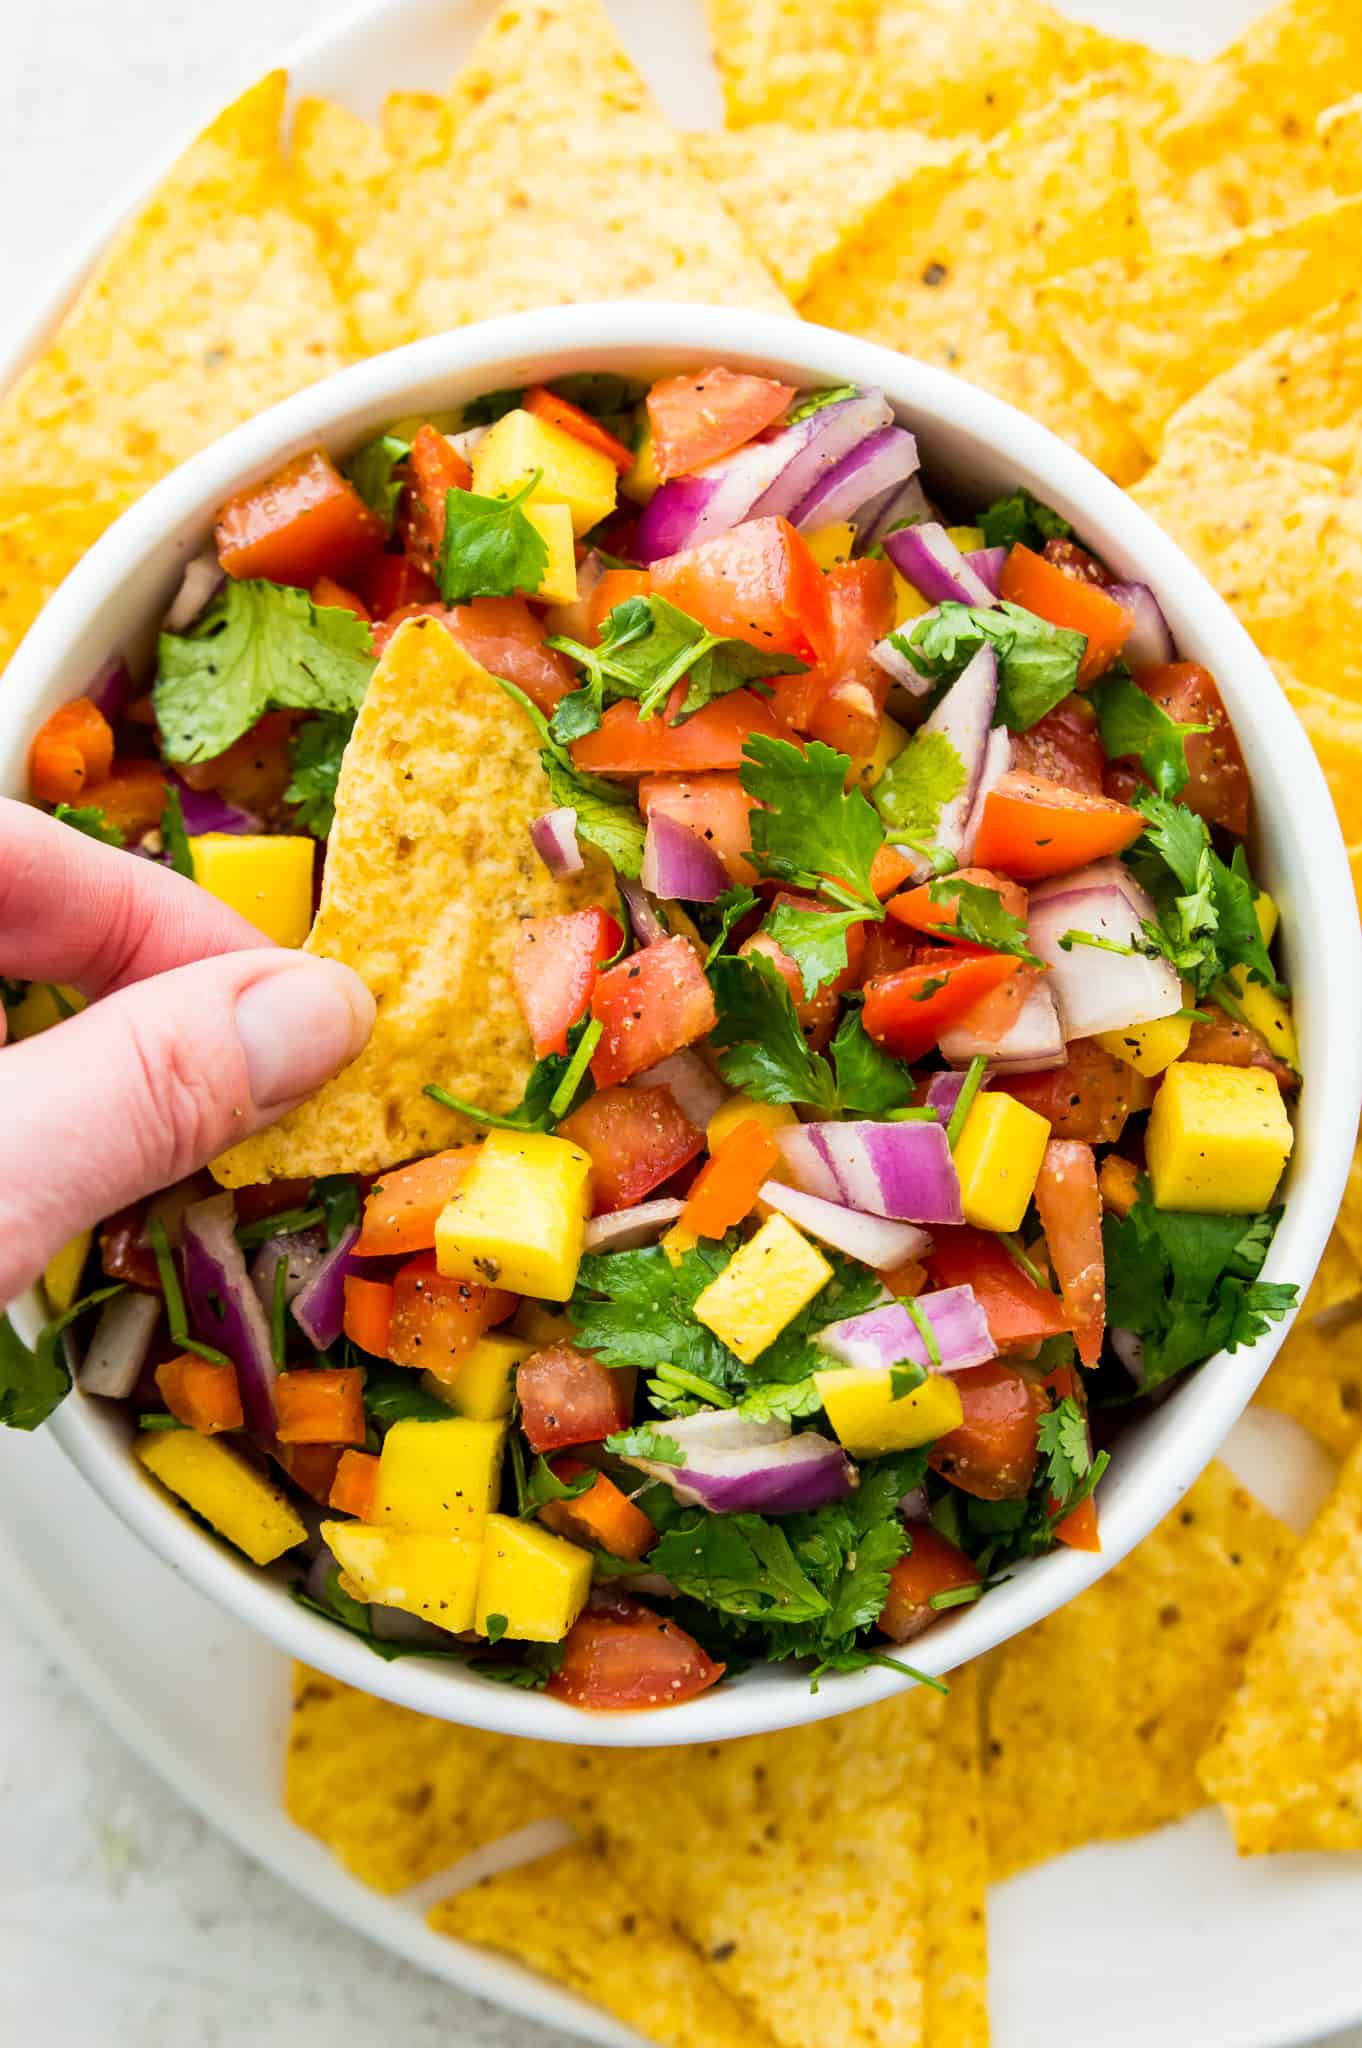 A hand dipping a corn tortilla chip into a bowl of mango salsa with tomatoes and red onions